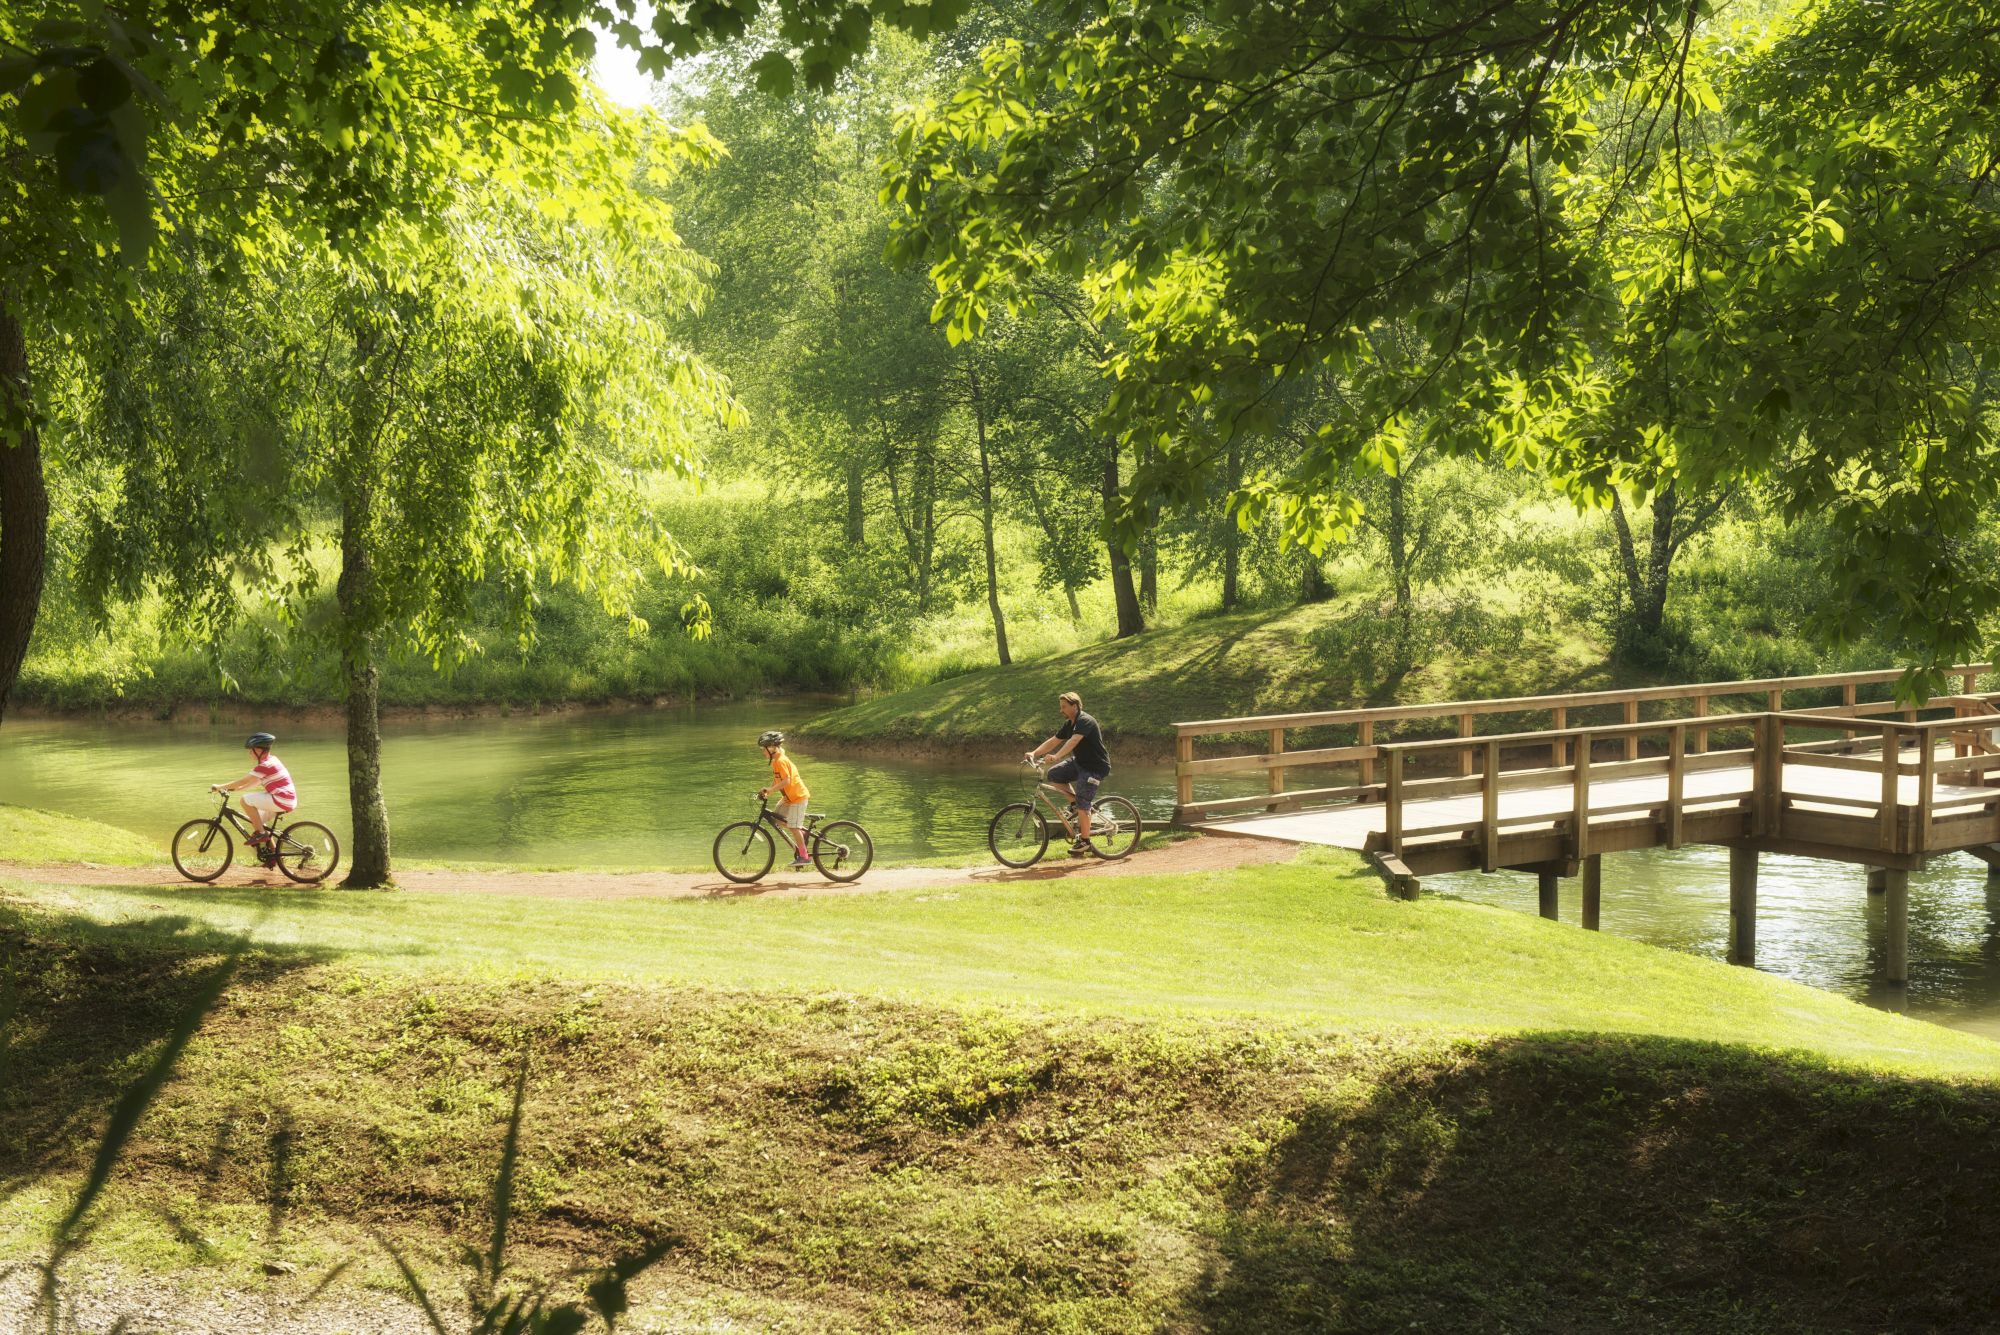 Three people are riding bicycles across a wooden bridge in a lush, green park with trees and a pond.